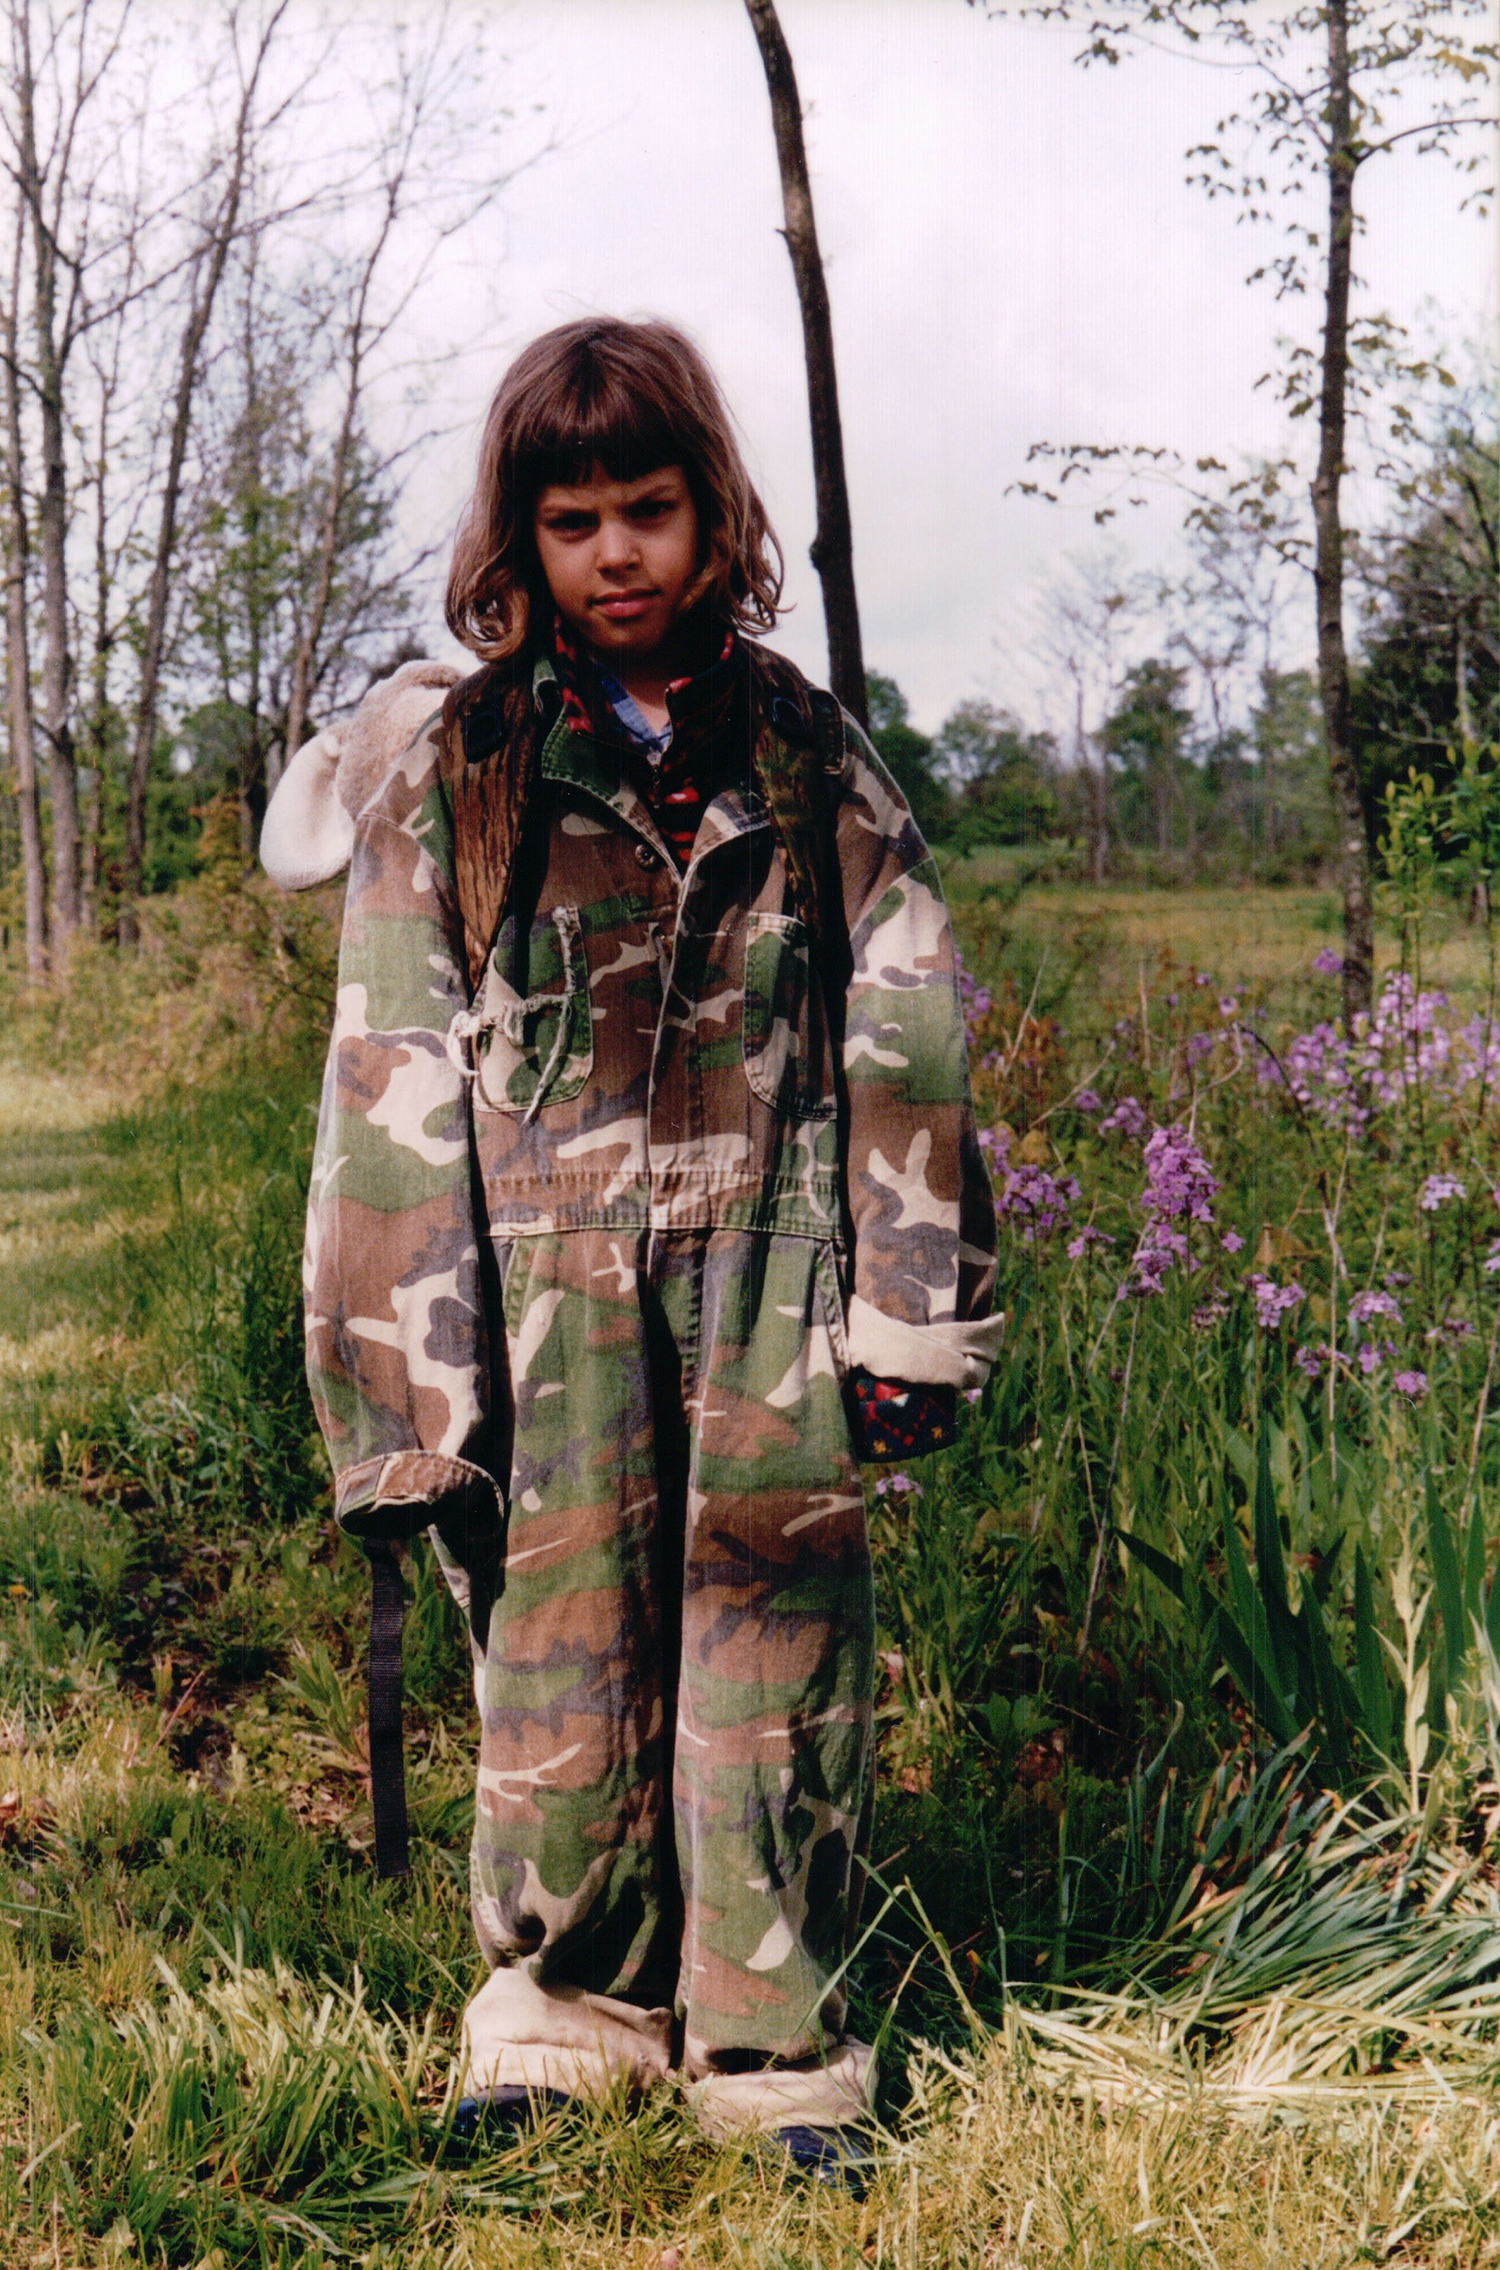 Natalie Krebs in oversized hunting clothes.